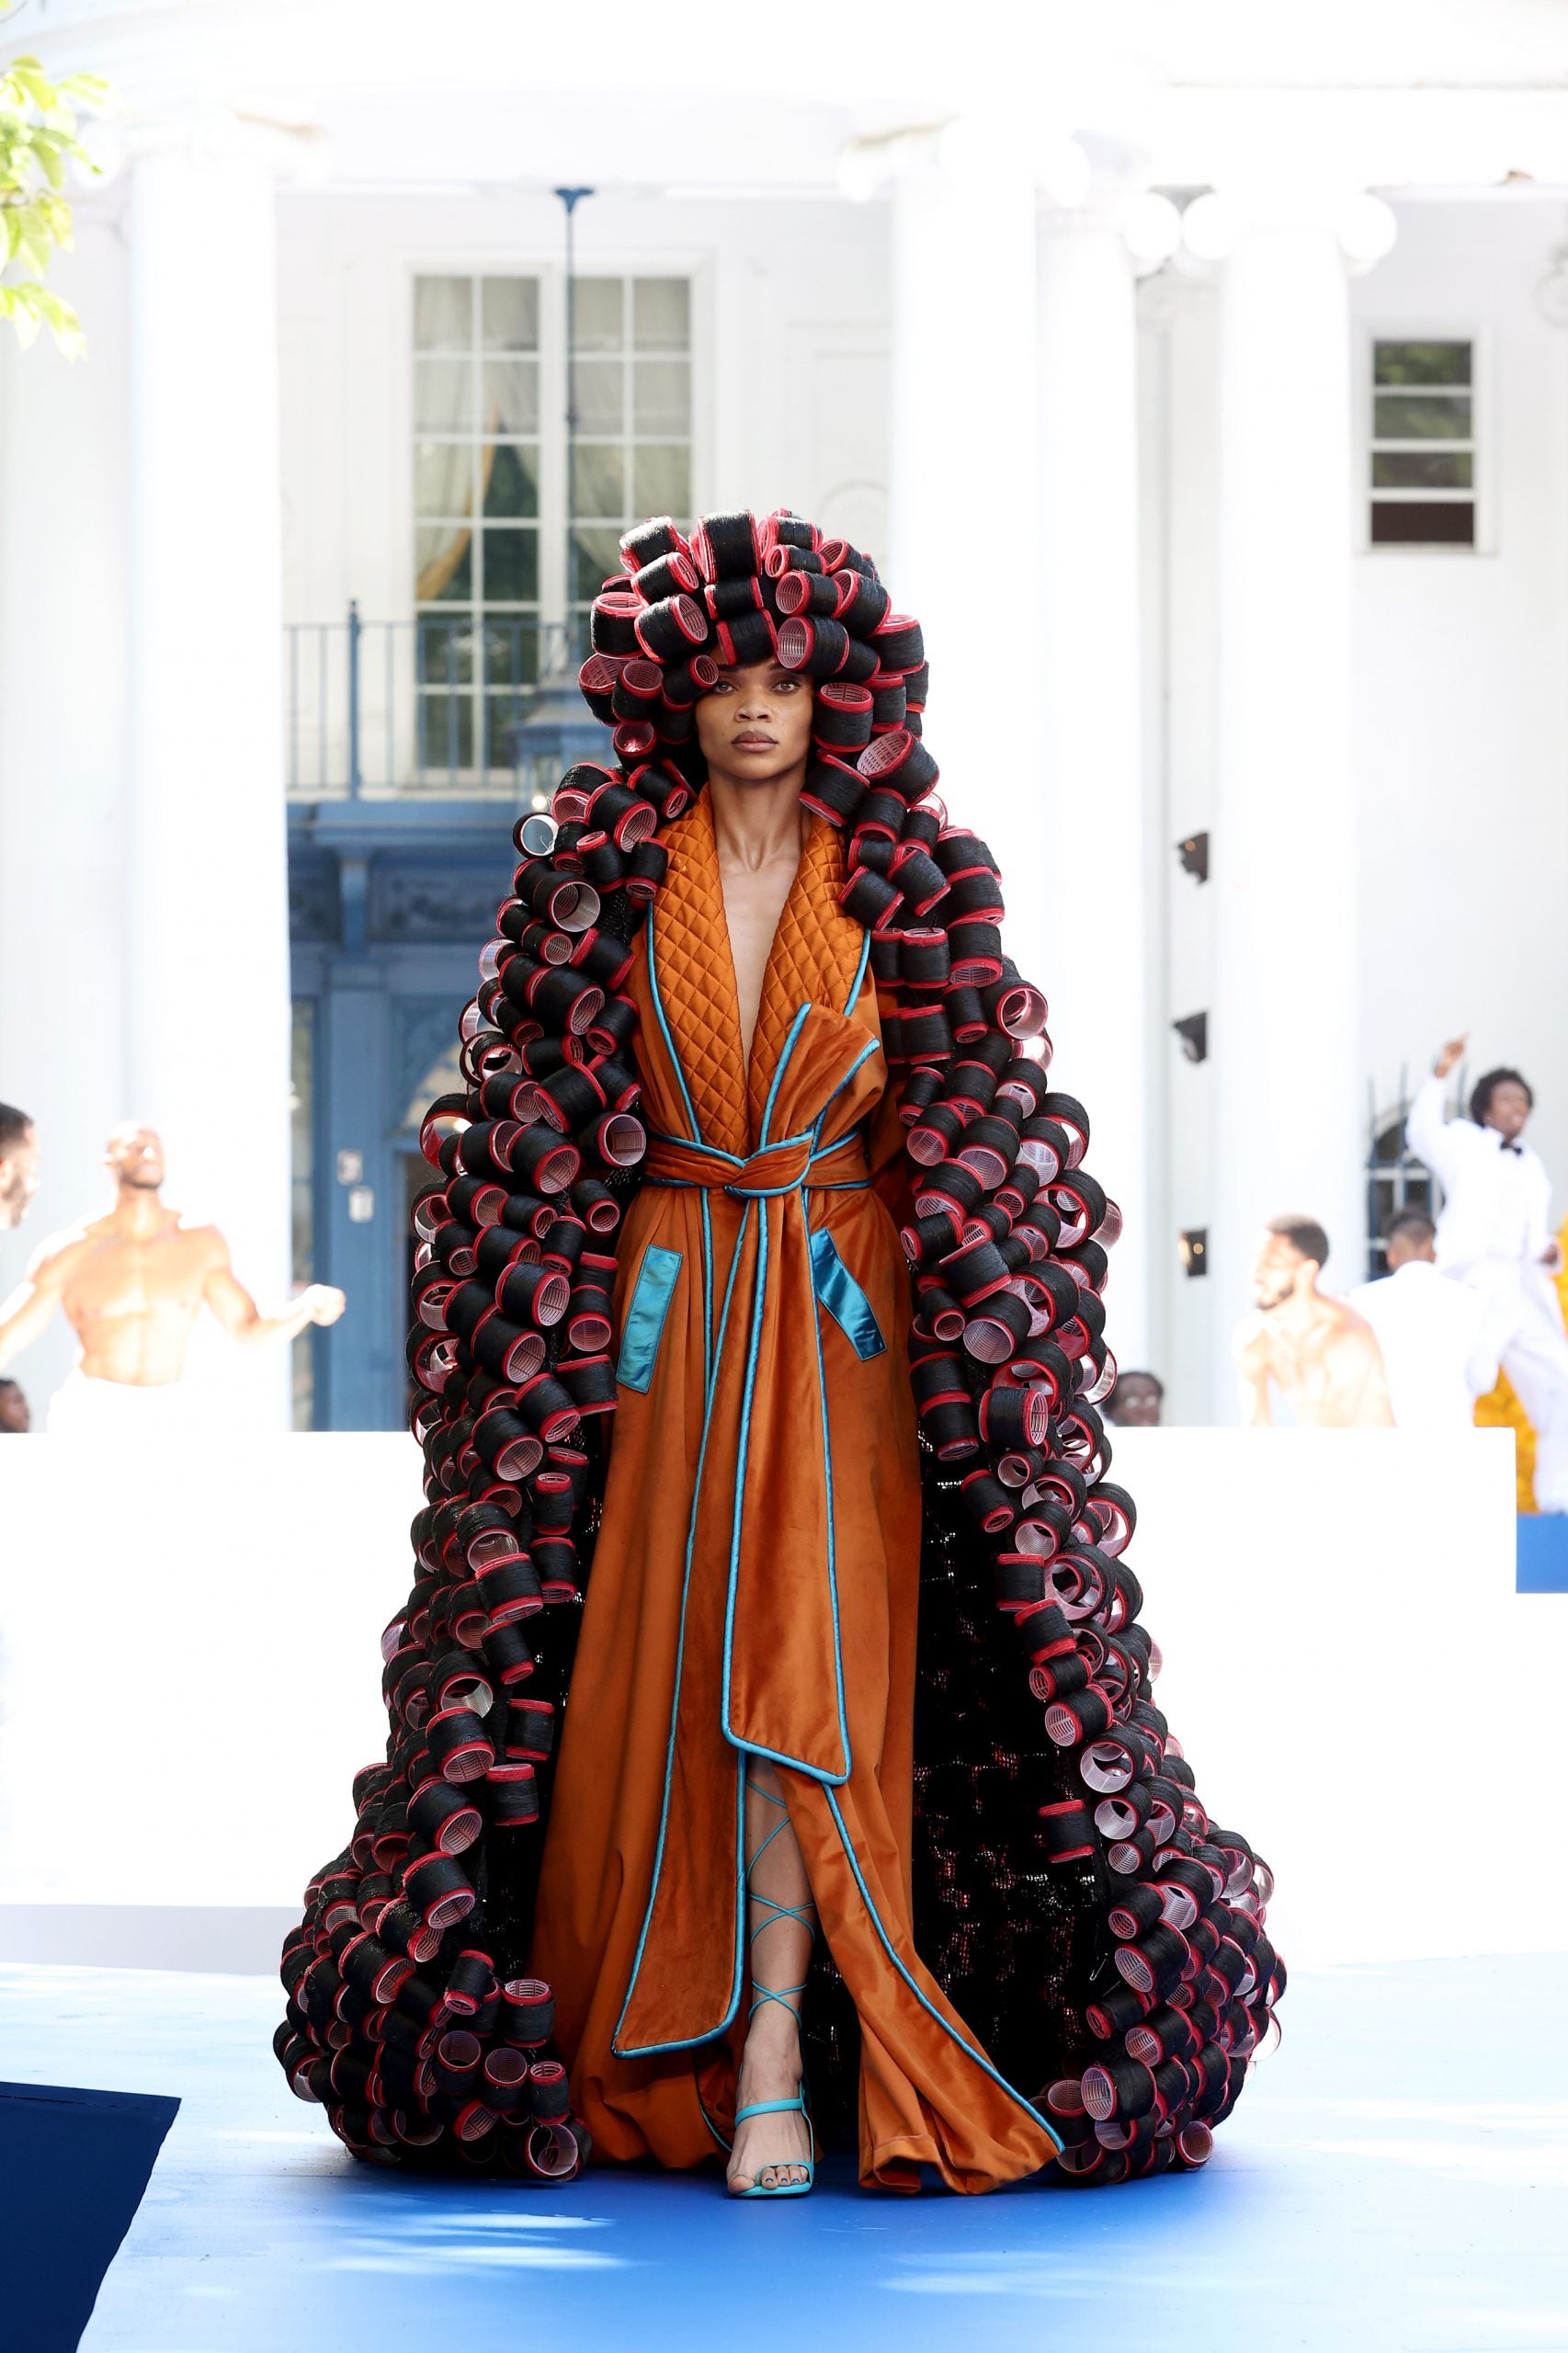 Pyer Moss's Fall 2021 Couture Collection Was Dedicated To The Erasure Of Black Inventors